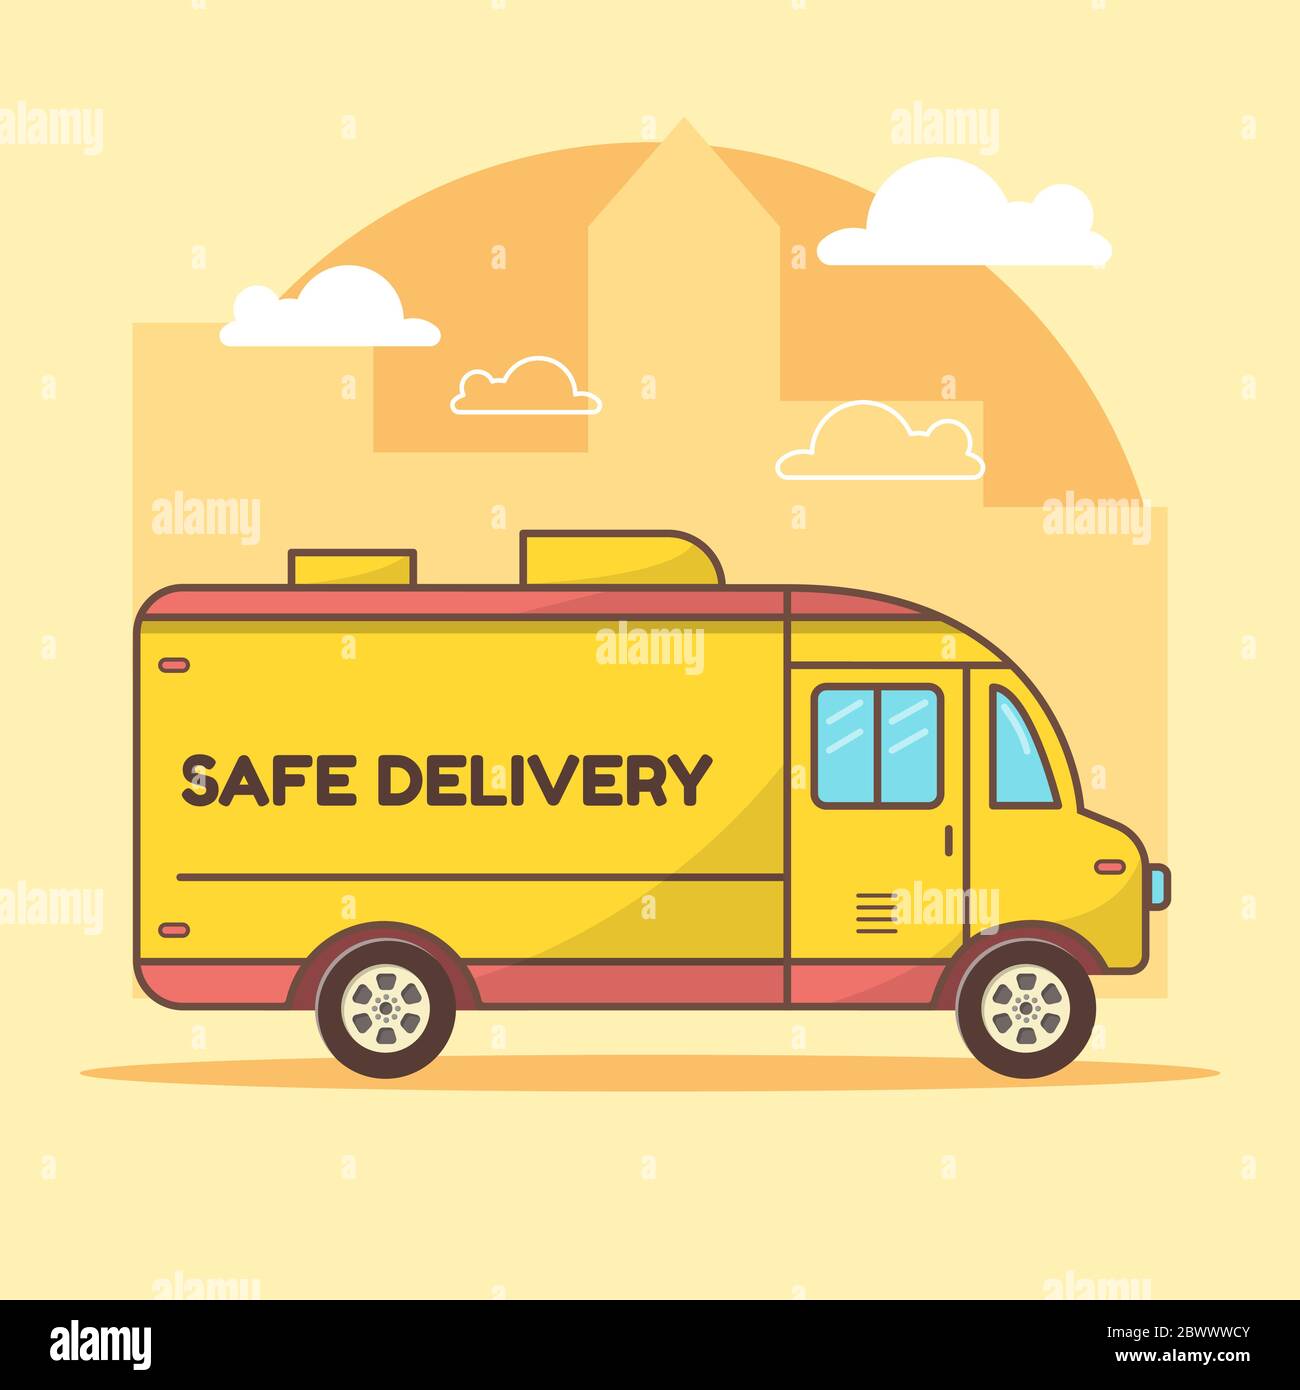 Deliver truck flat style vector stock illustration Stock Vector